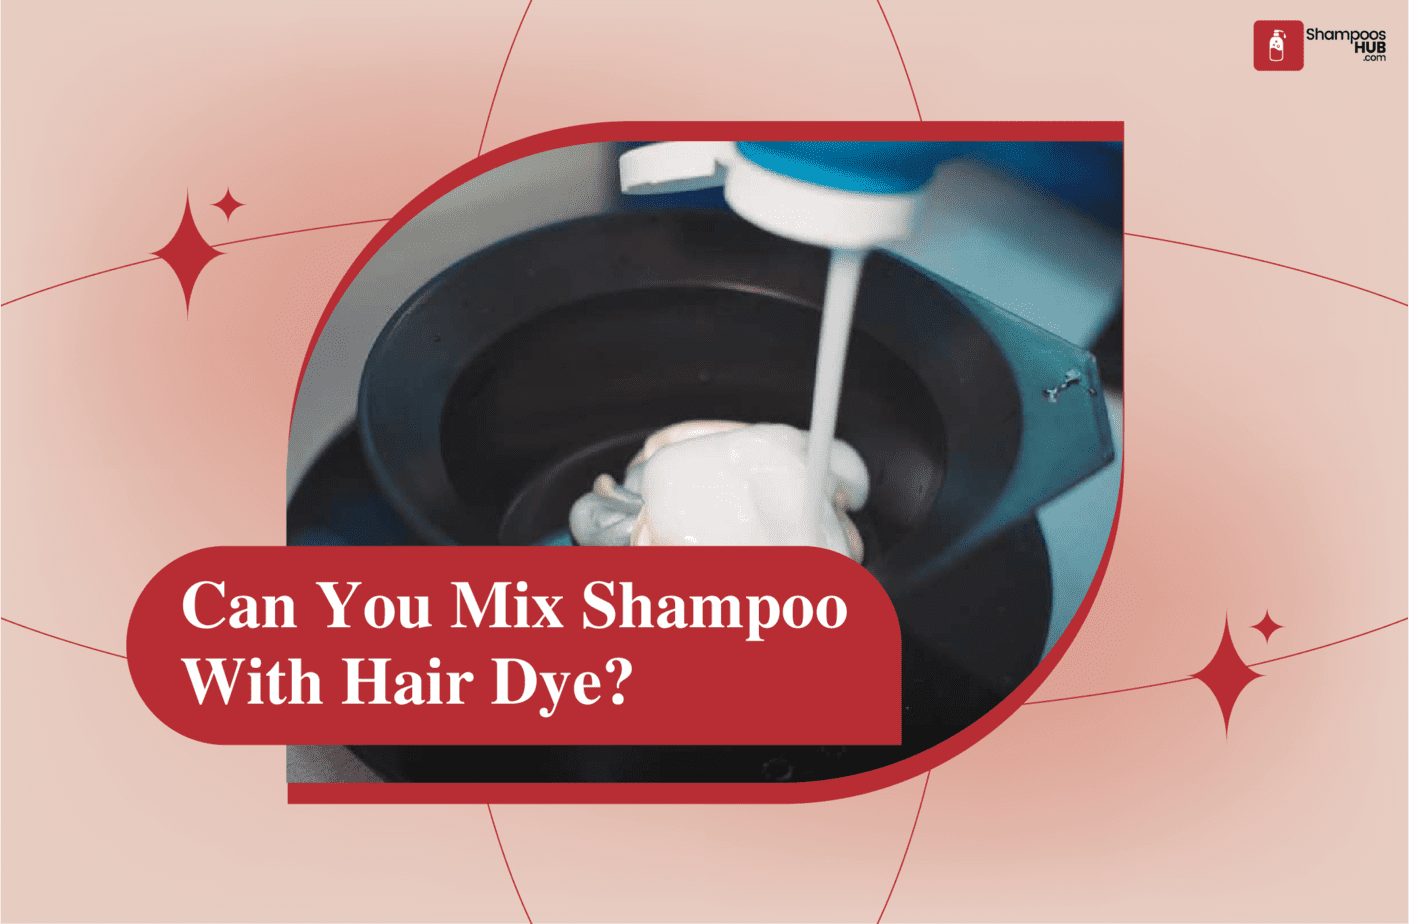 Can You Mix Shampoo With Hair Dye?